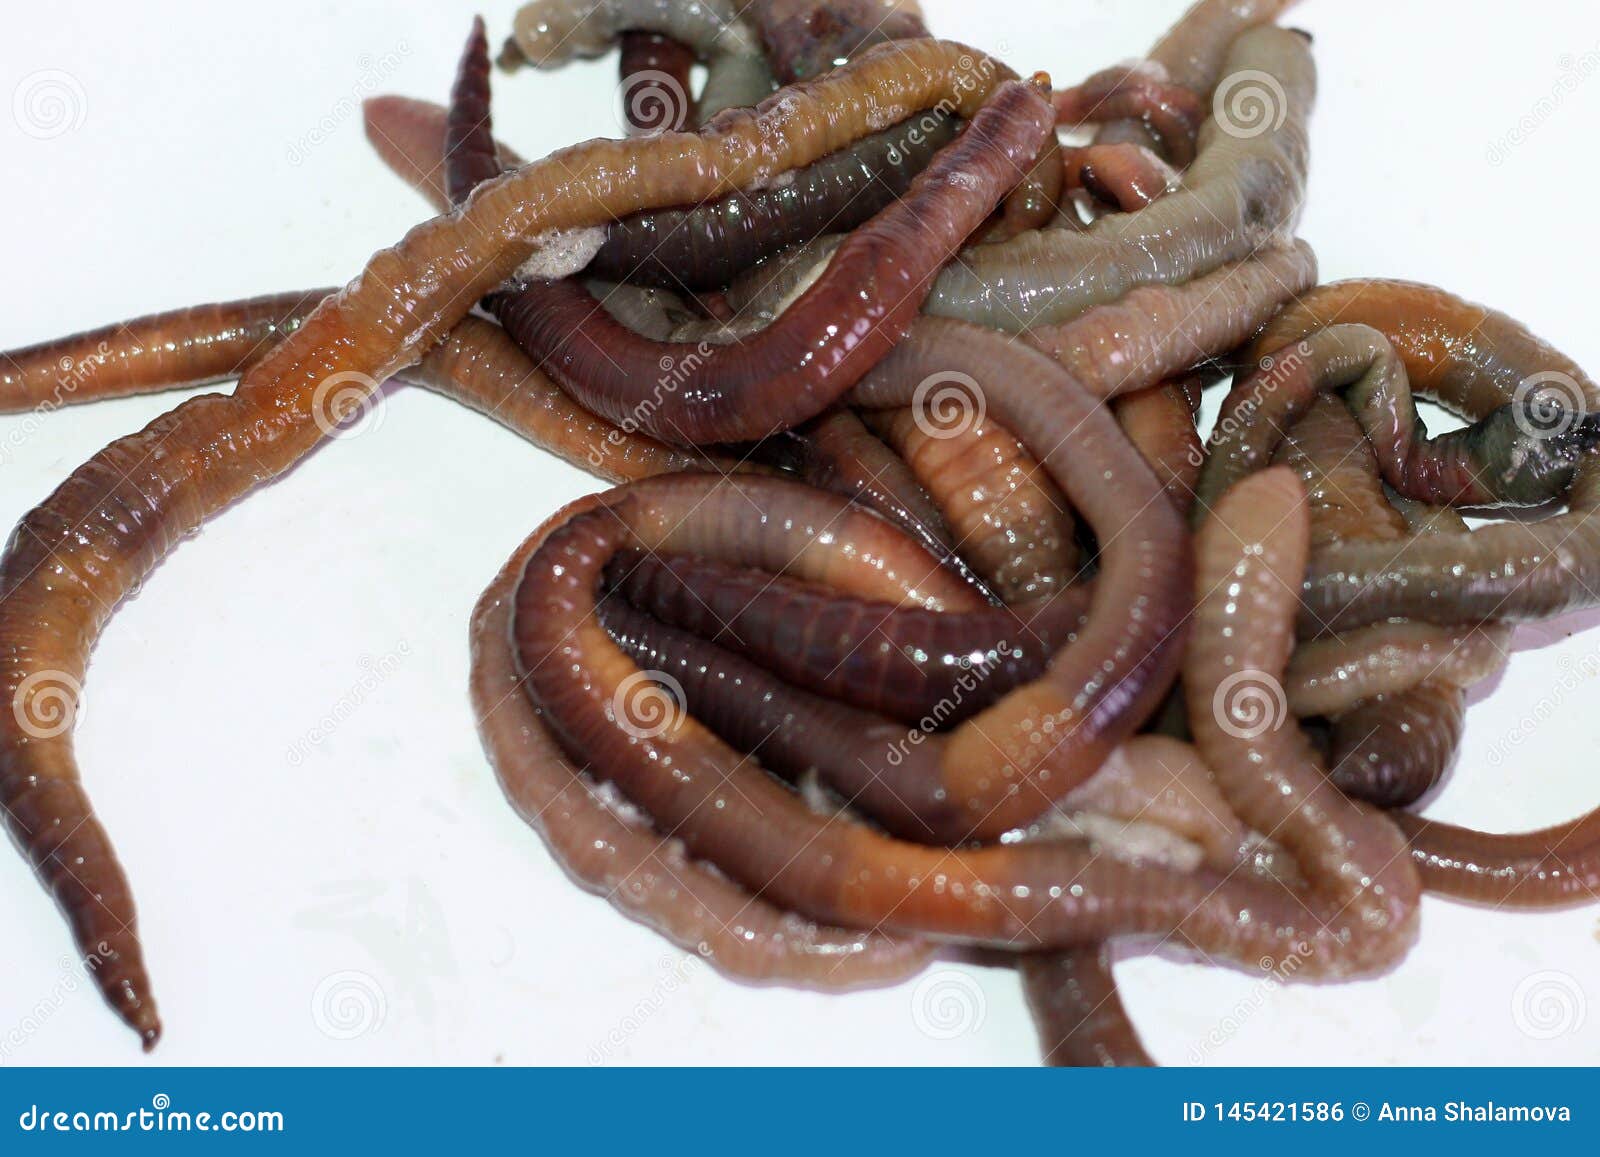 Macro Shooting of Red Dendrobaena Worms, Live Earthworm Bait for